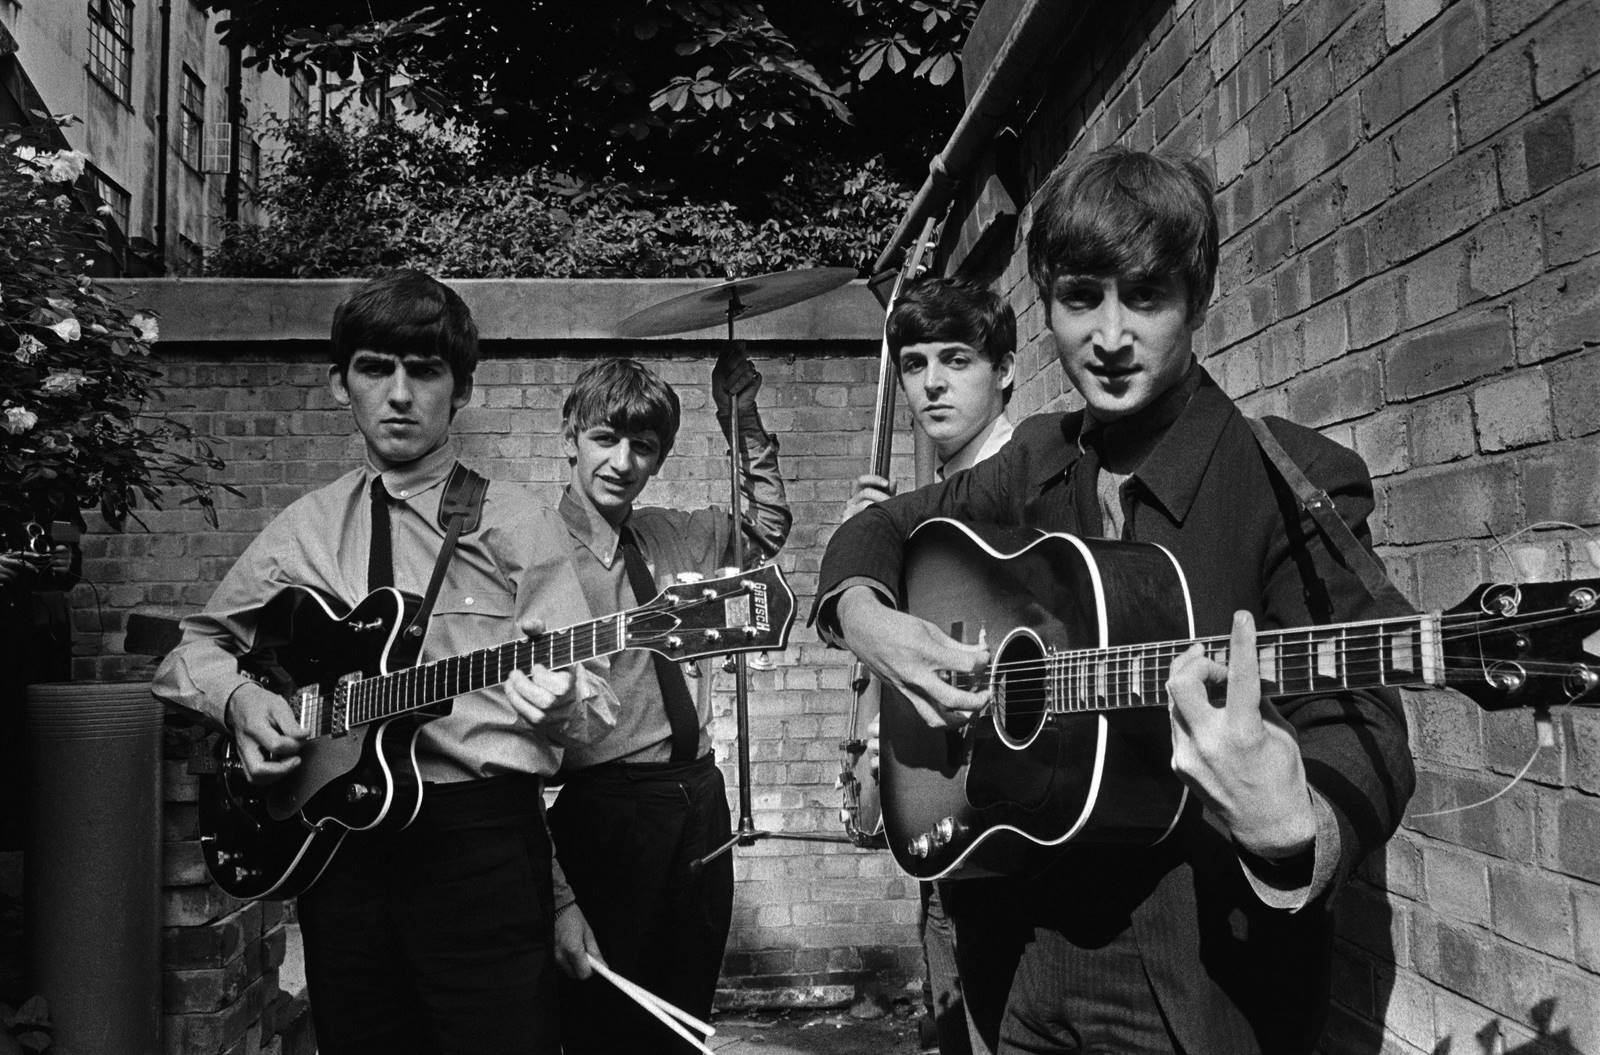 Terry O'Neill - The Beatles, Londen 1963 - © Iconic Images & Terry O'Neill